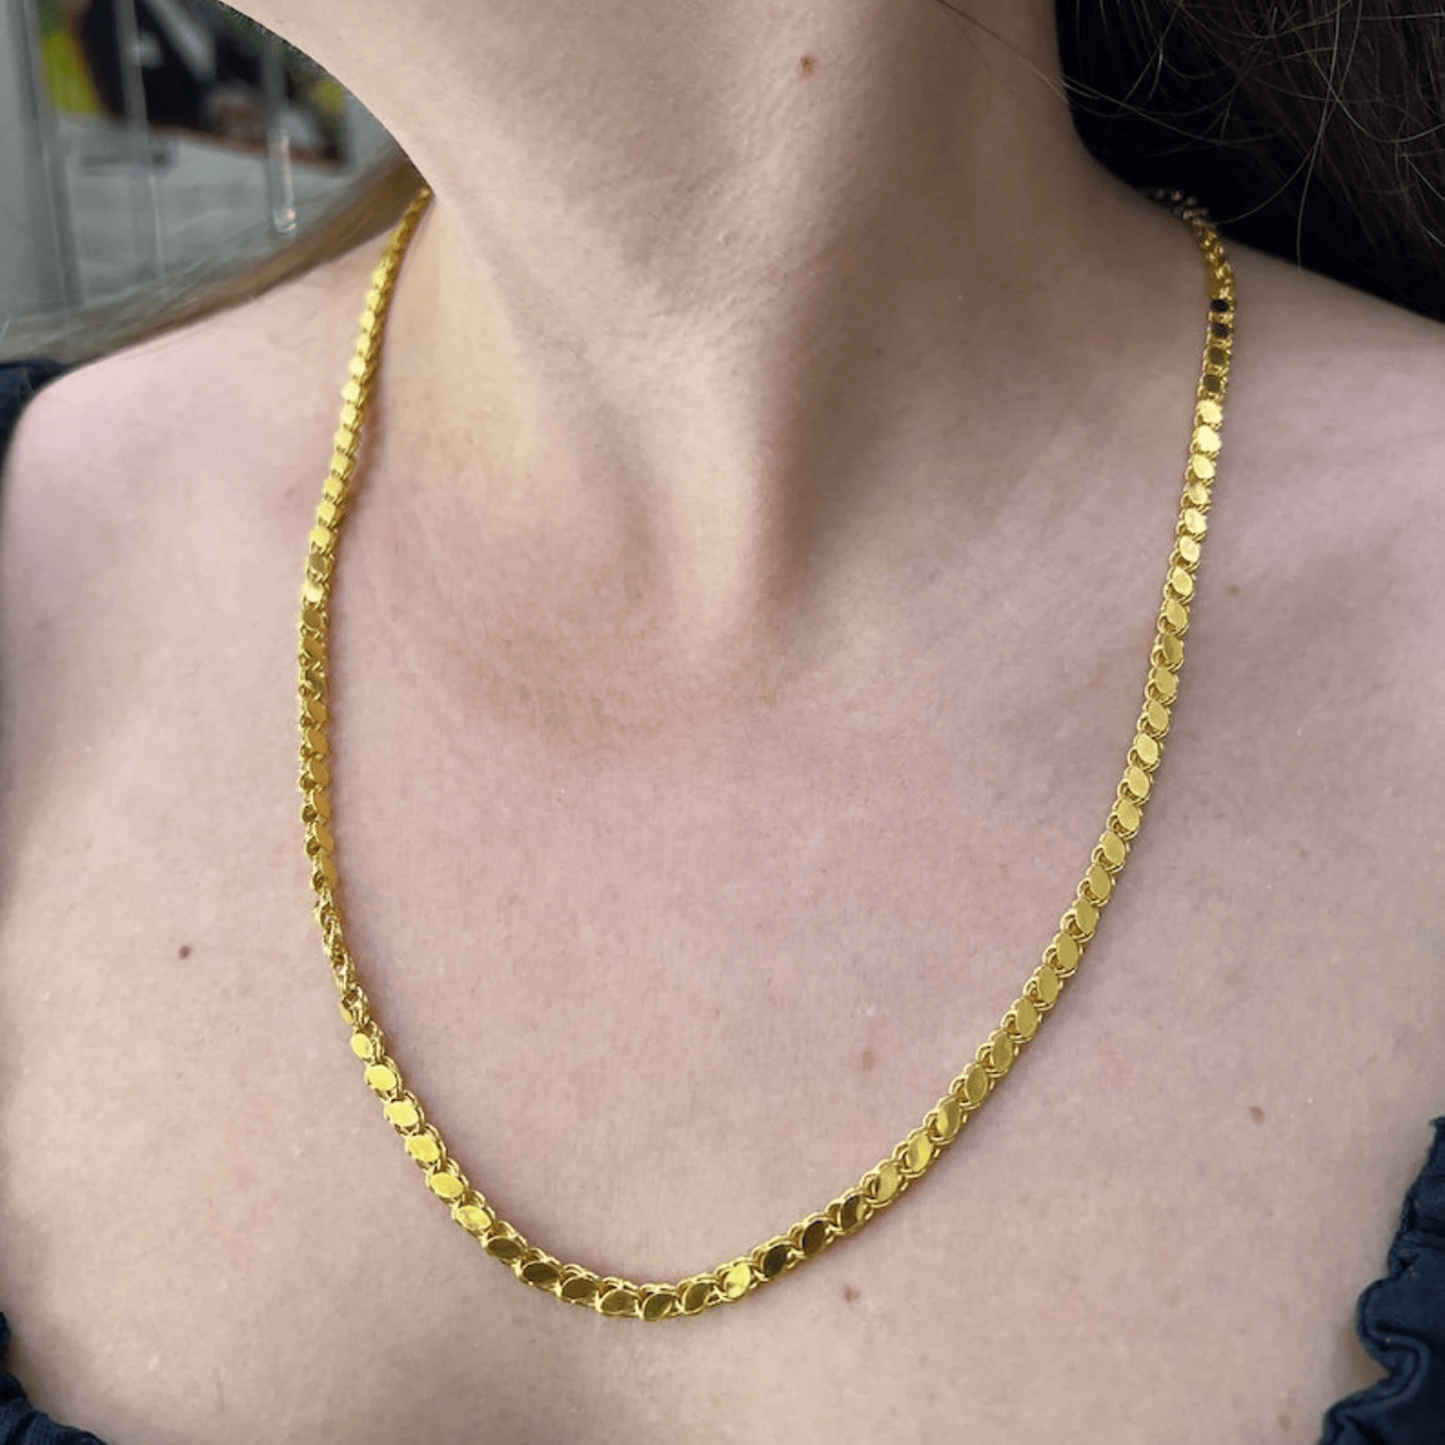 Leaf Rope Chain Necklace Yellow Gold 24kdiamond